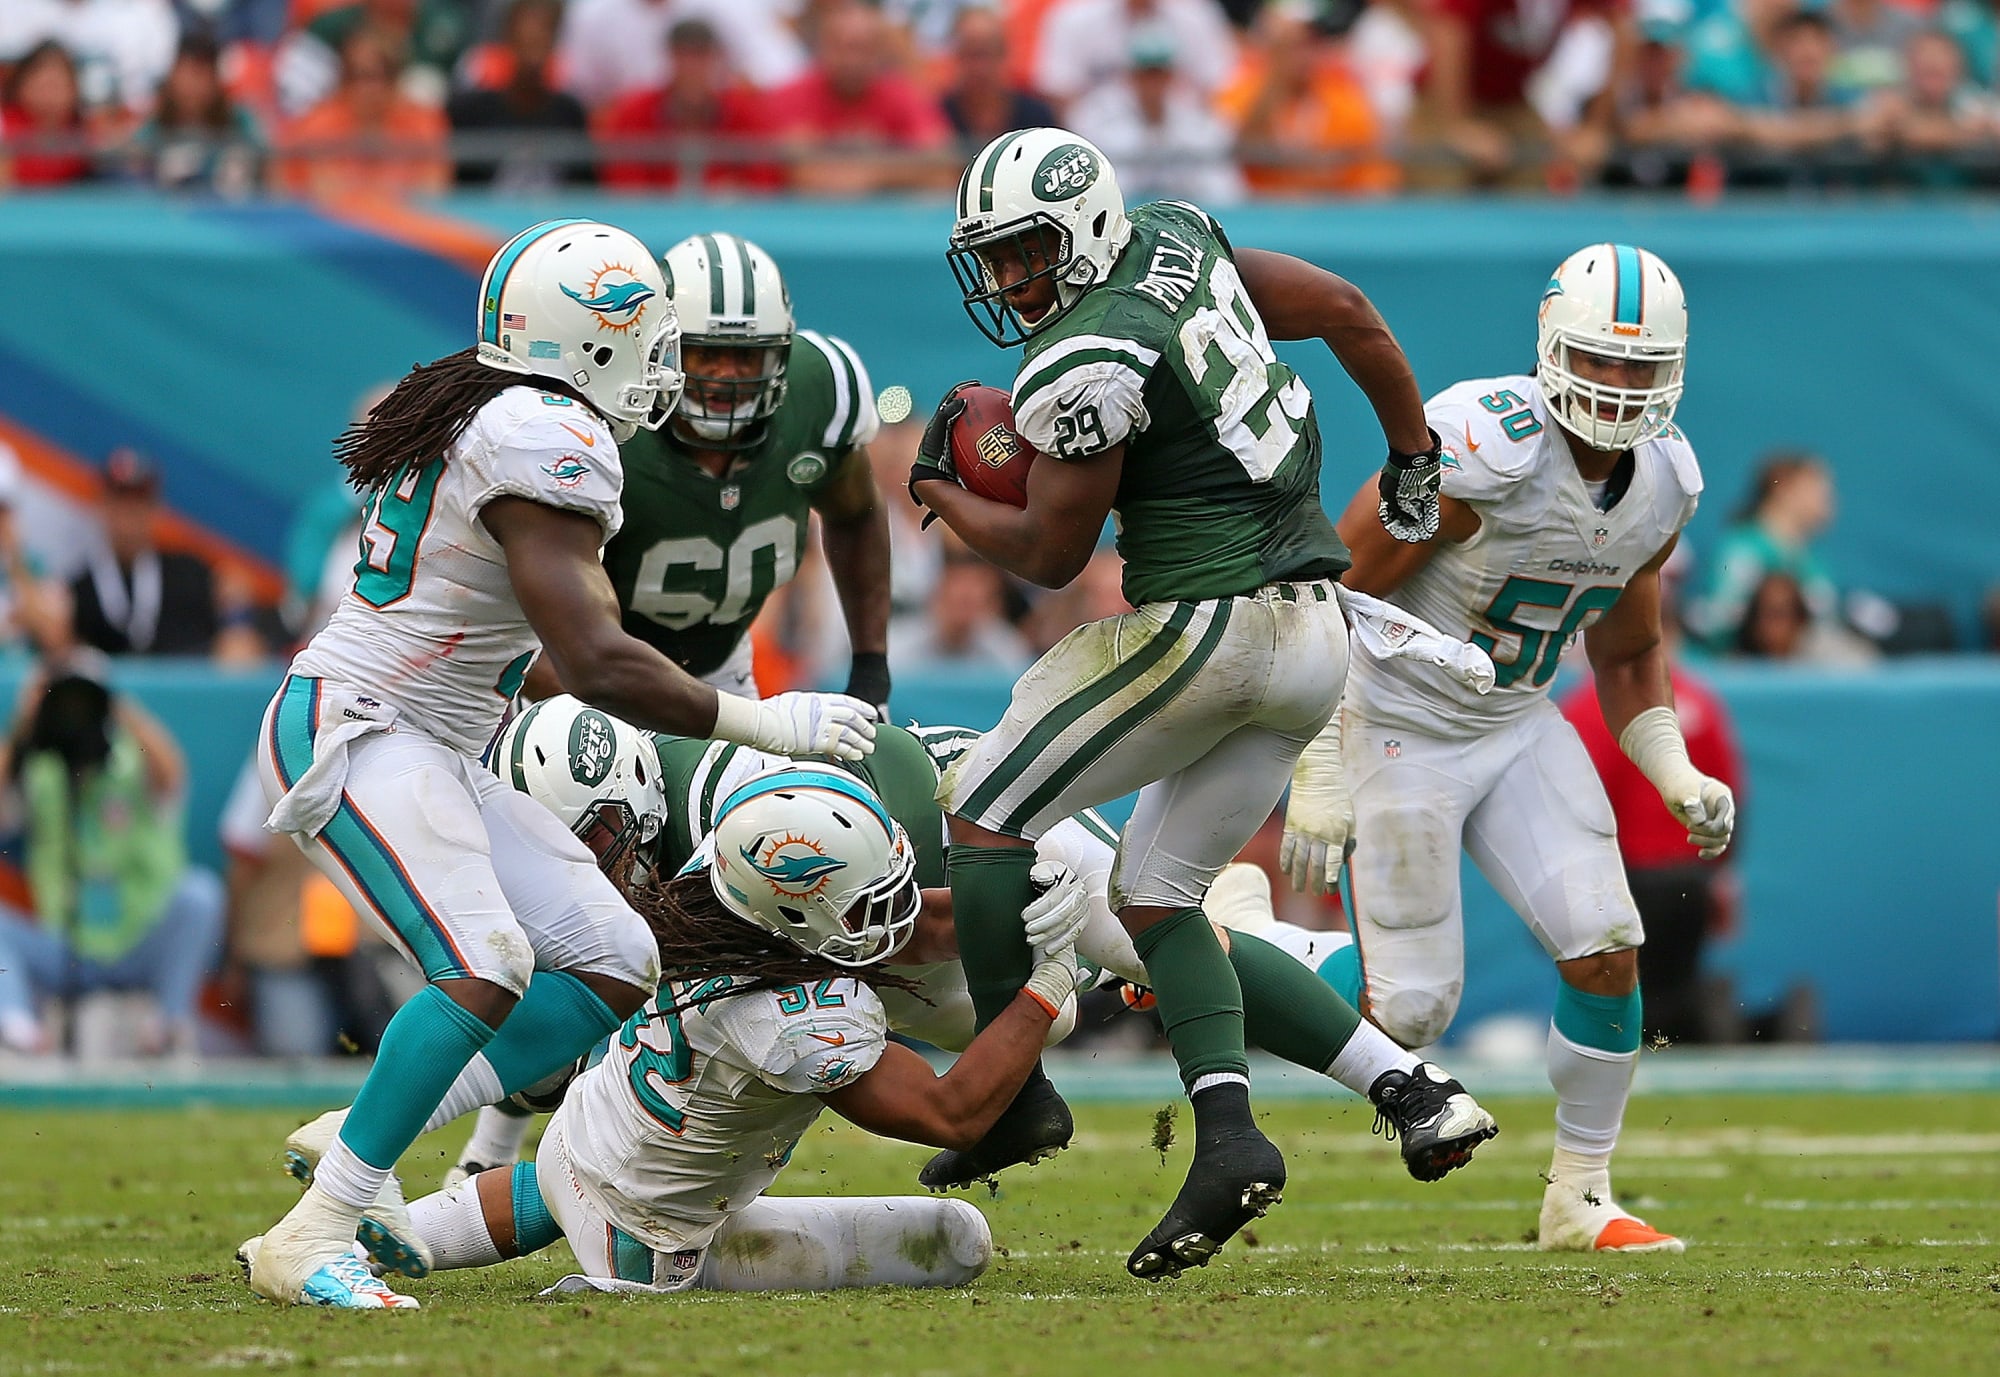 New York Jets vs. Miami Dolphins Where to watch, listen and more